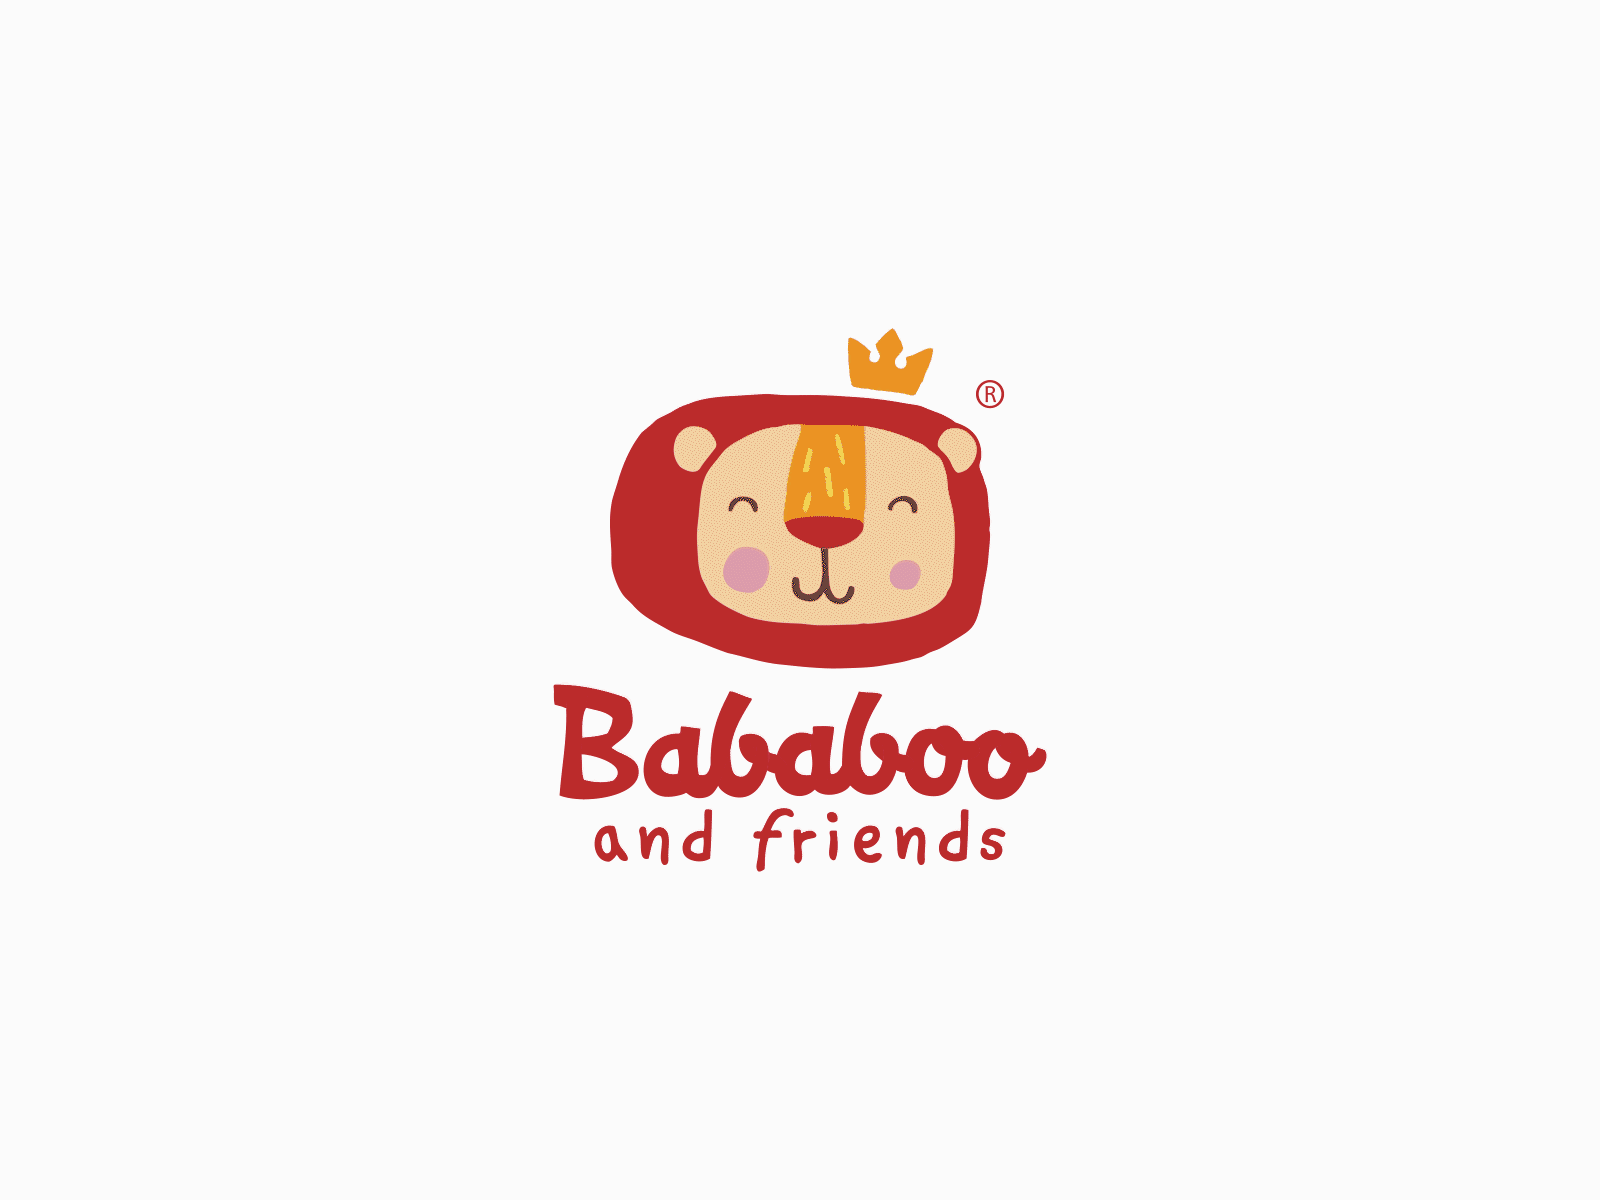 Logo animation for "Bababoo and friends"